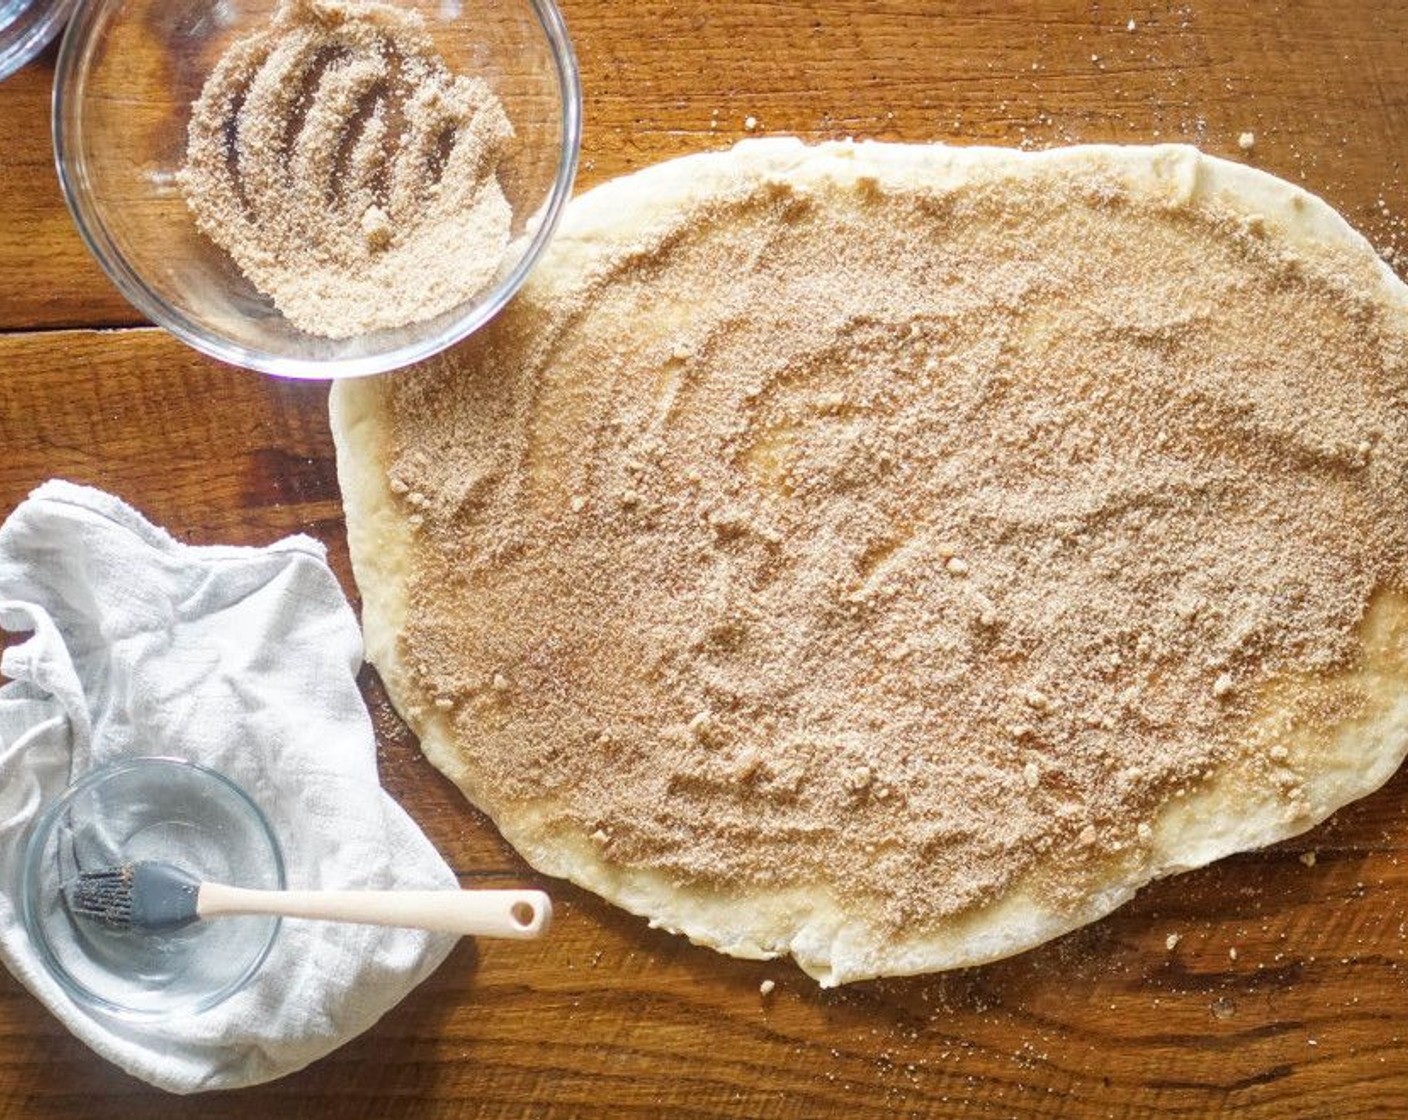 step 9 Combine the Brown Sugar (3/4 cup), Granulated Sugar (2 Tbsp) and Ground Cinnamon (1/2 Tbsp) and mix. Evenly brush the Vegan Butter (1/4 cup) over the entire surface of the dough. Evenly sprinkle the sugar mix on top.